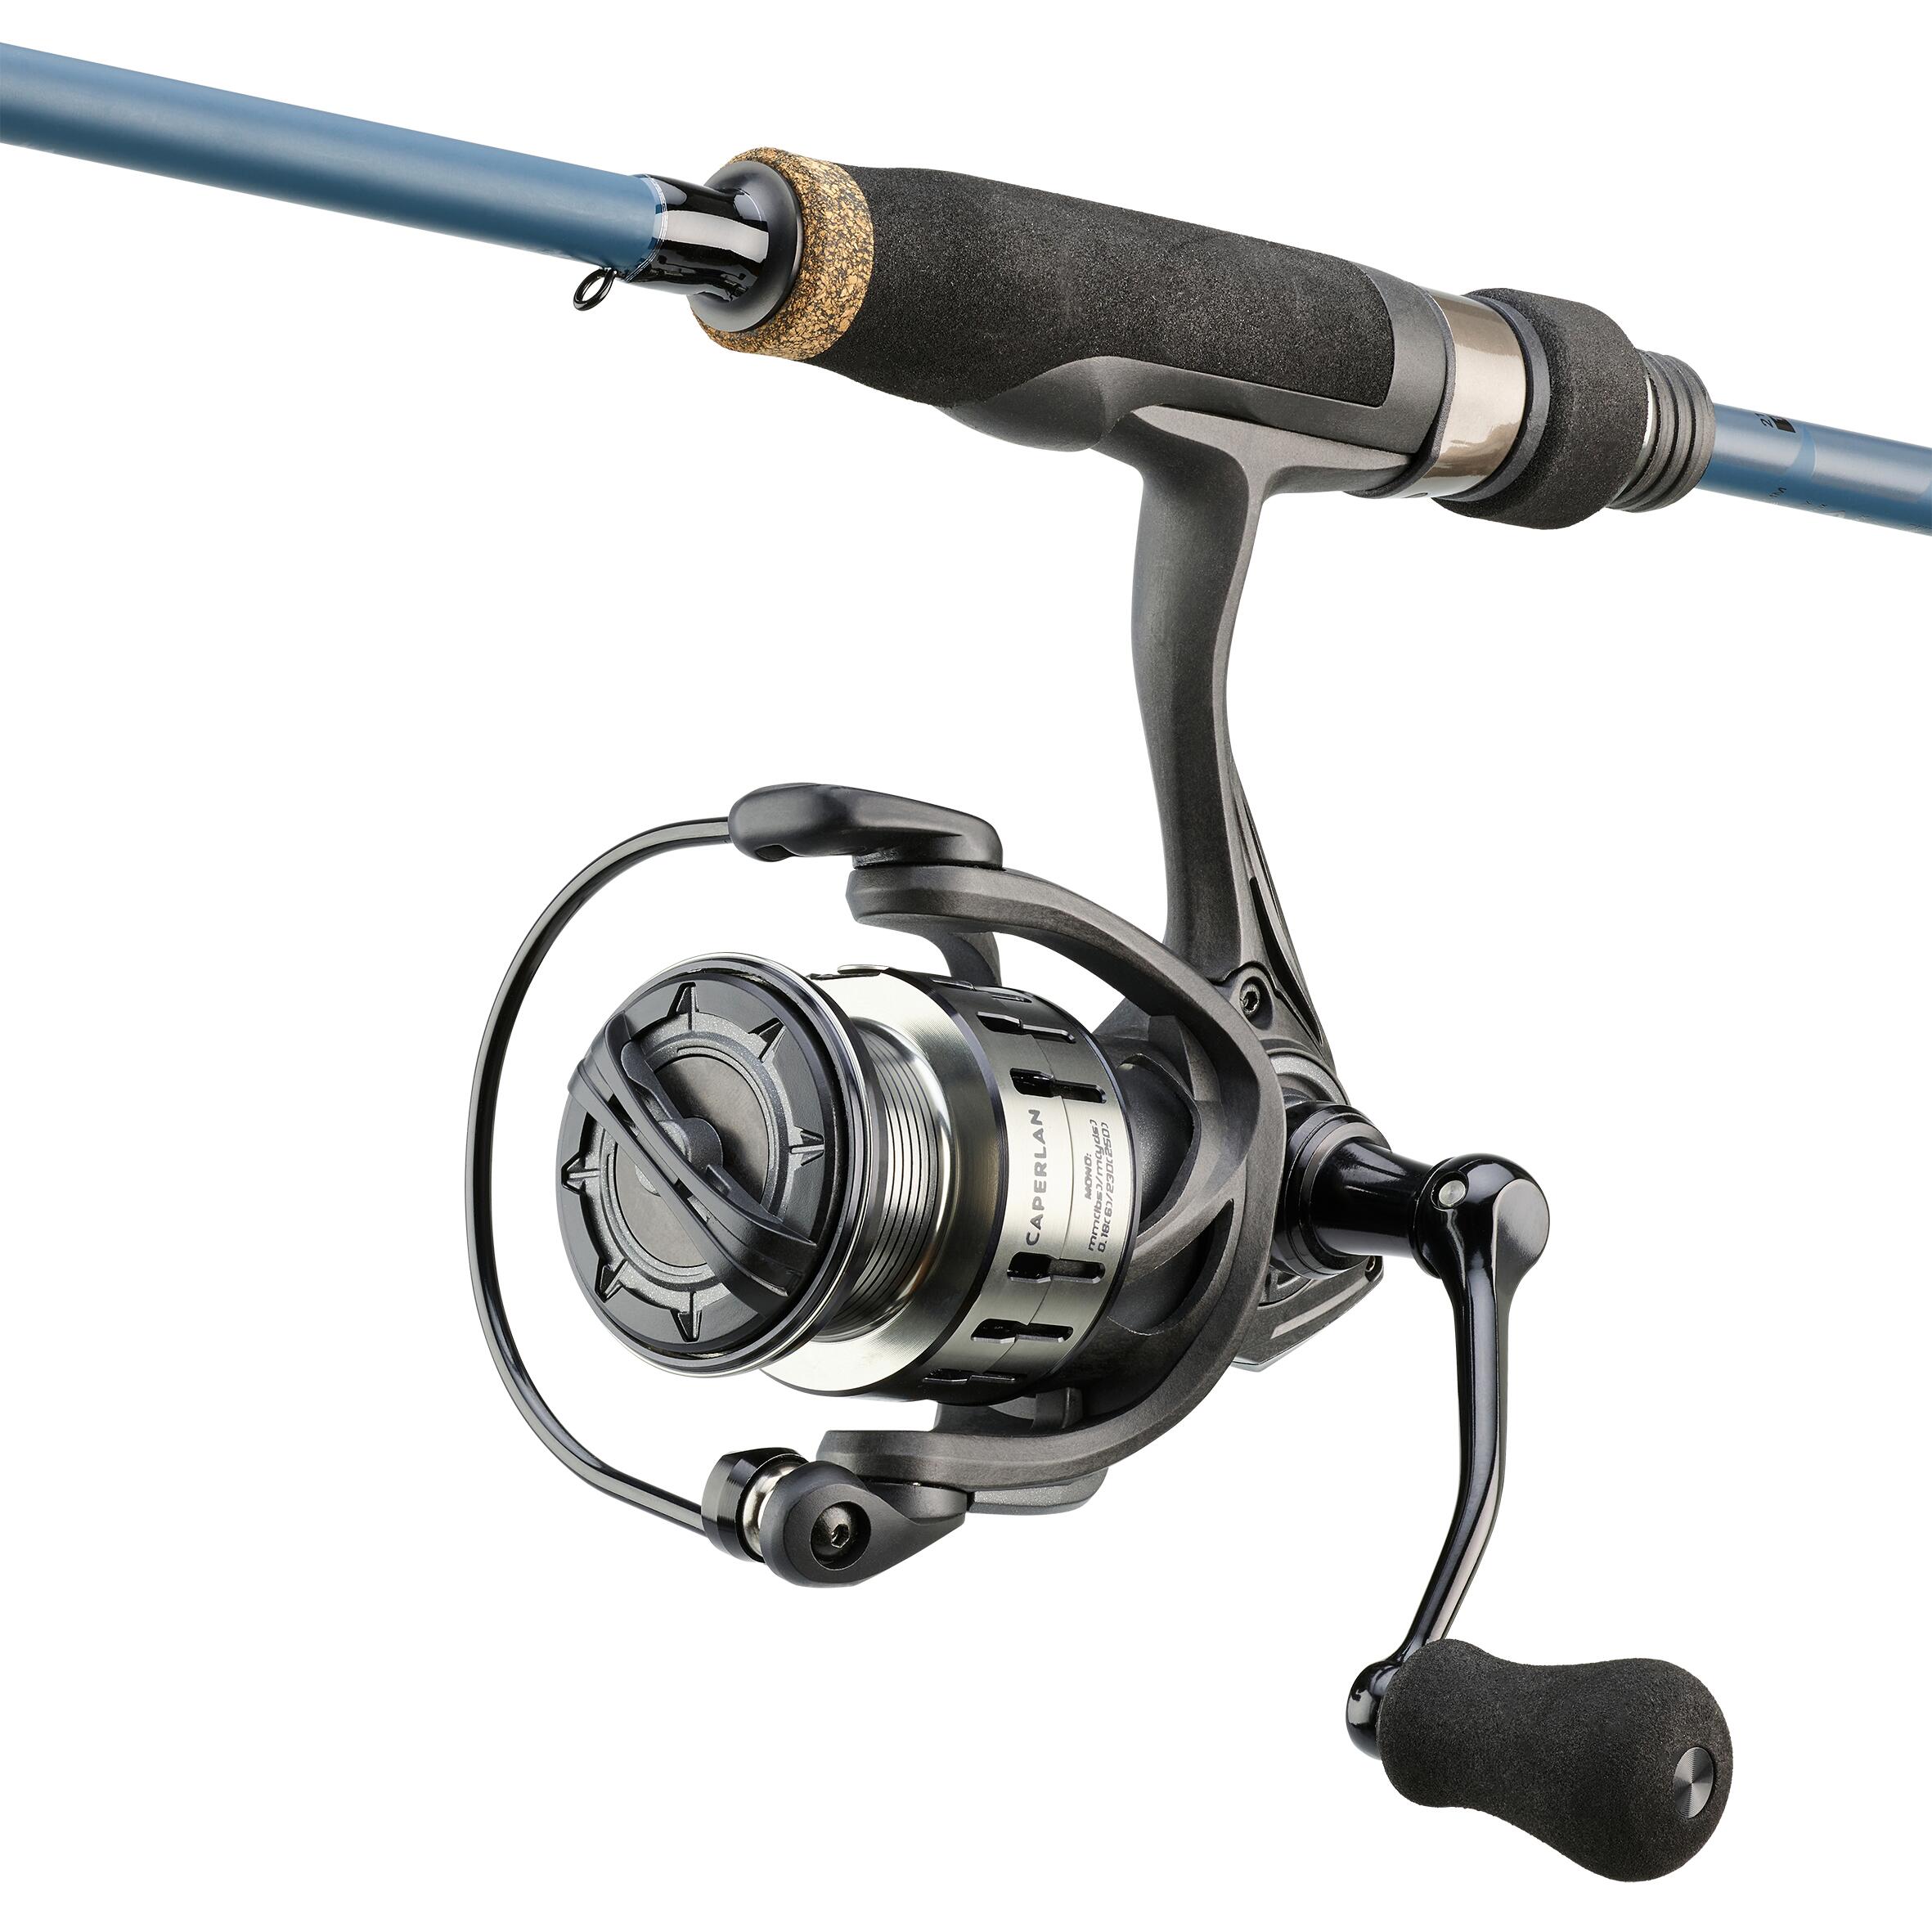 WXM-5 210 MH combo lure fishing rod and reel  - CAPERLAN